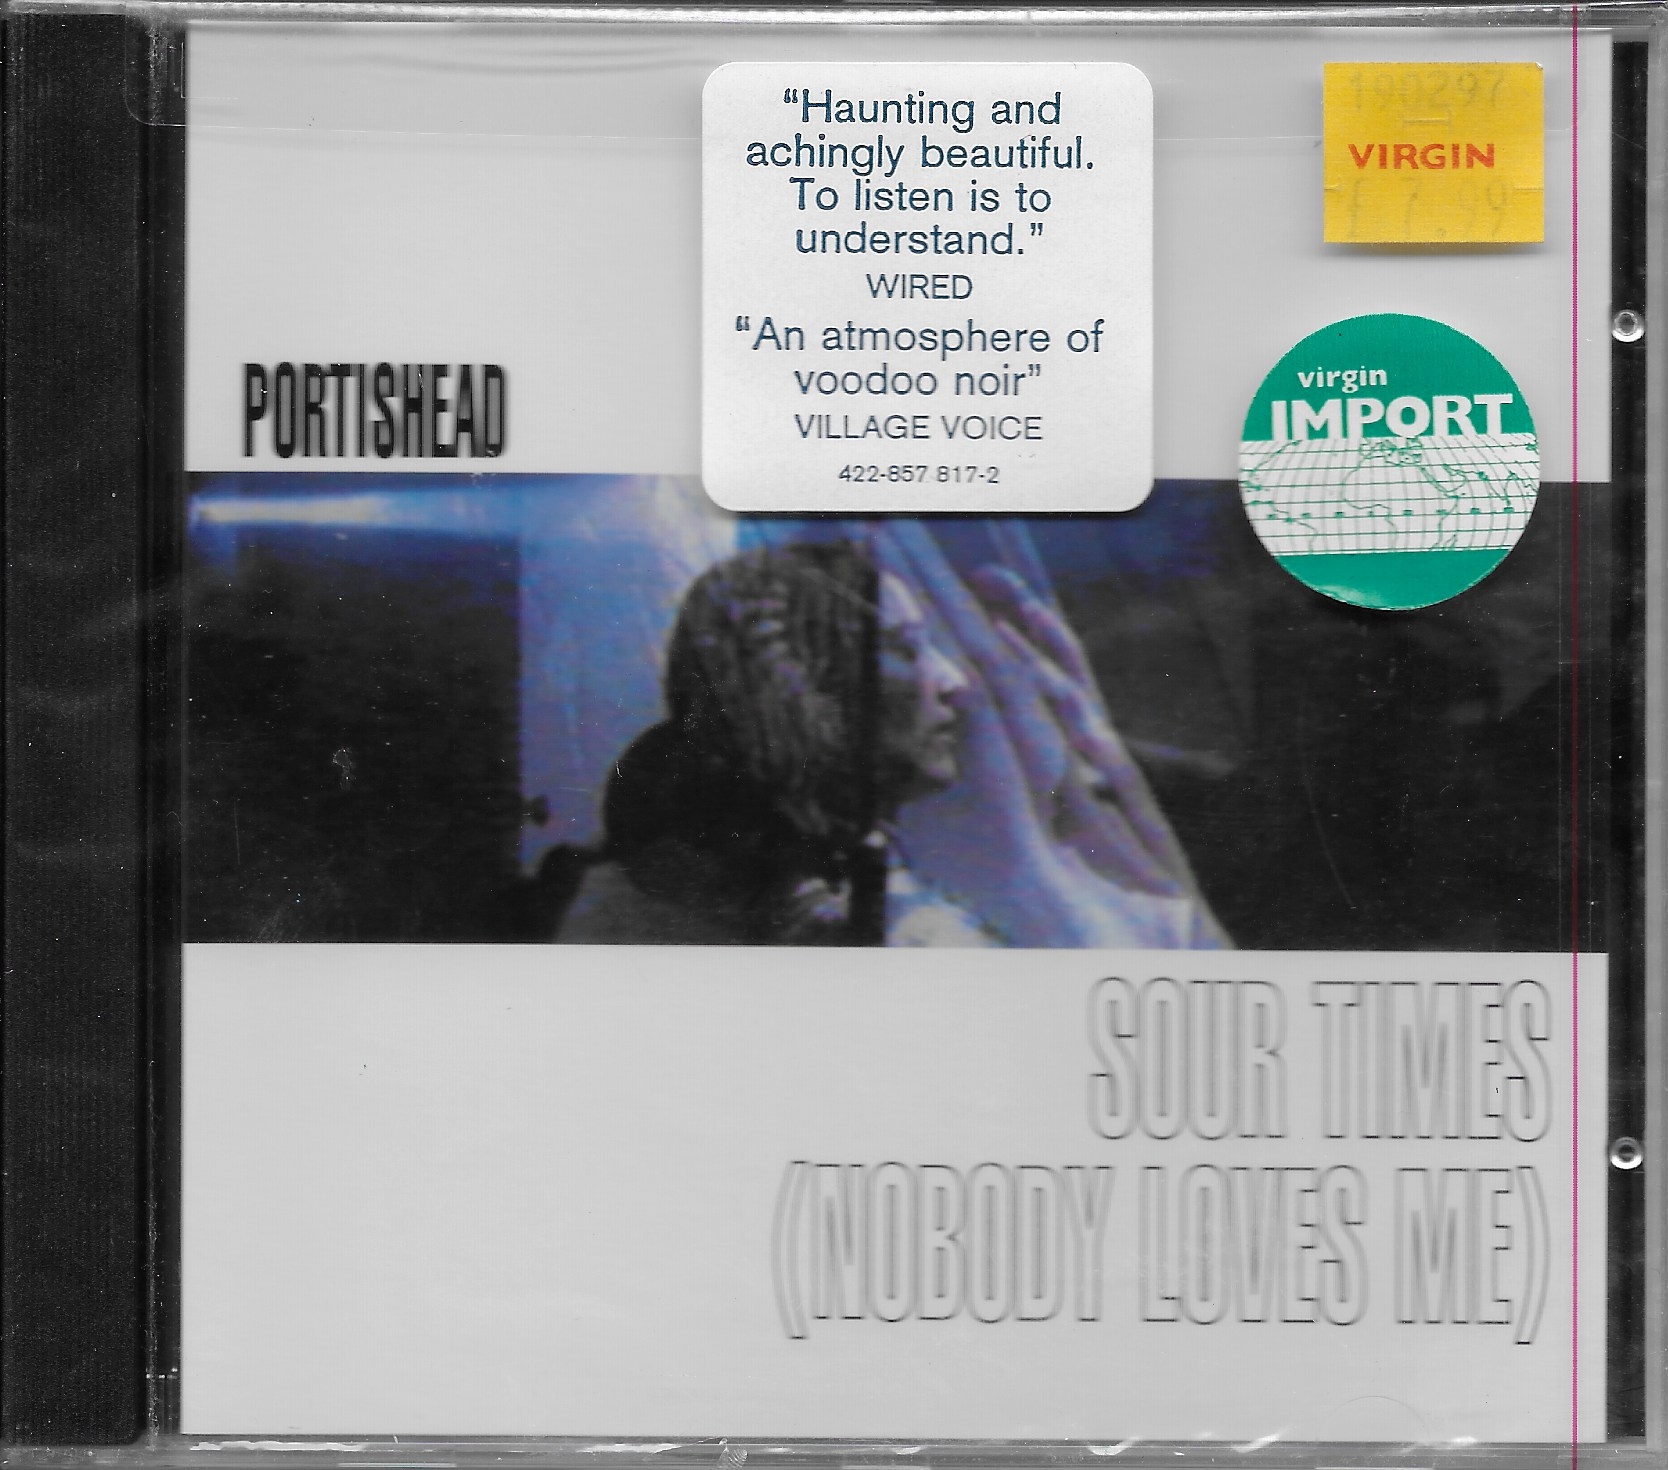 Picture of 857817 - 2 Sour times - US import by artist Portishead  